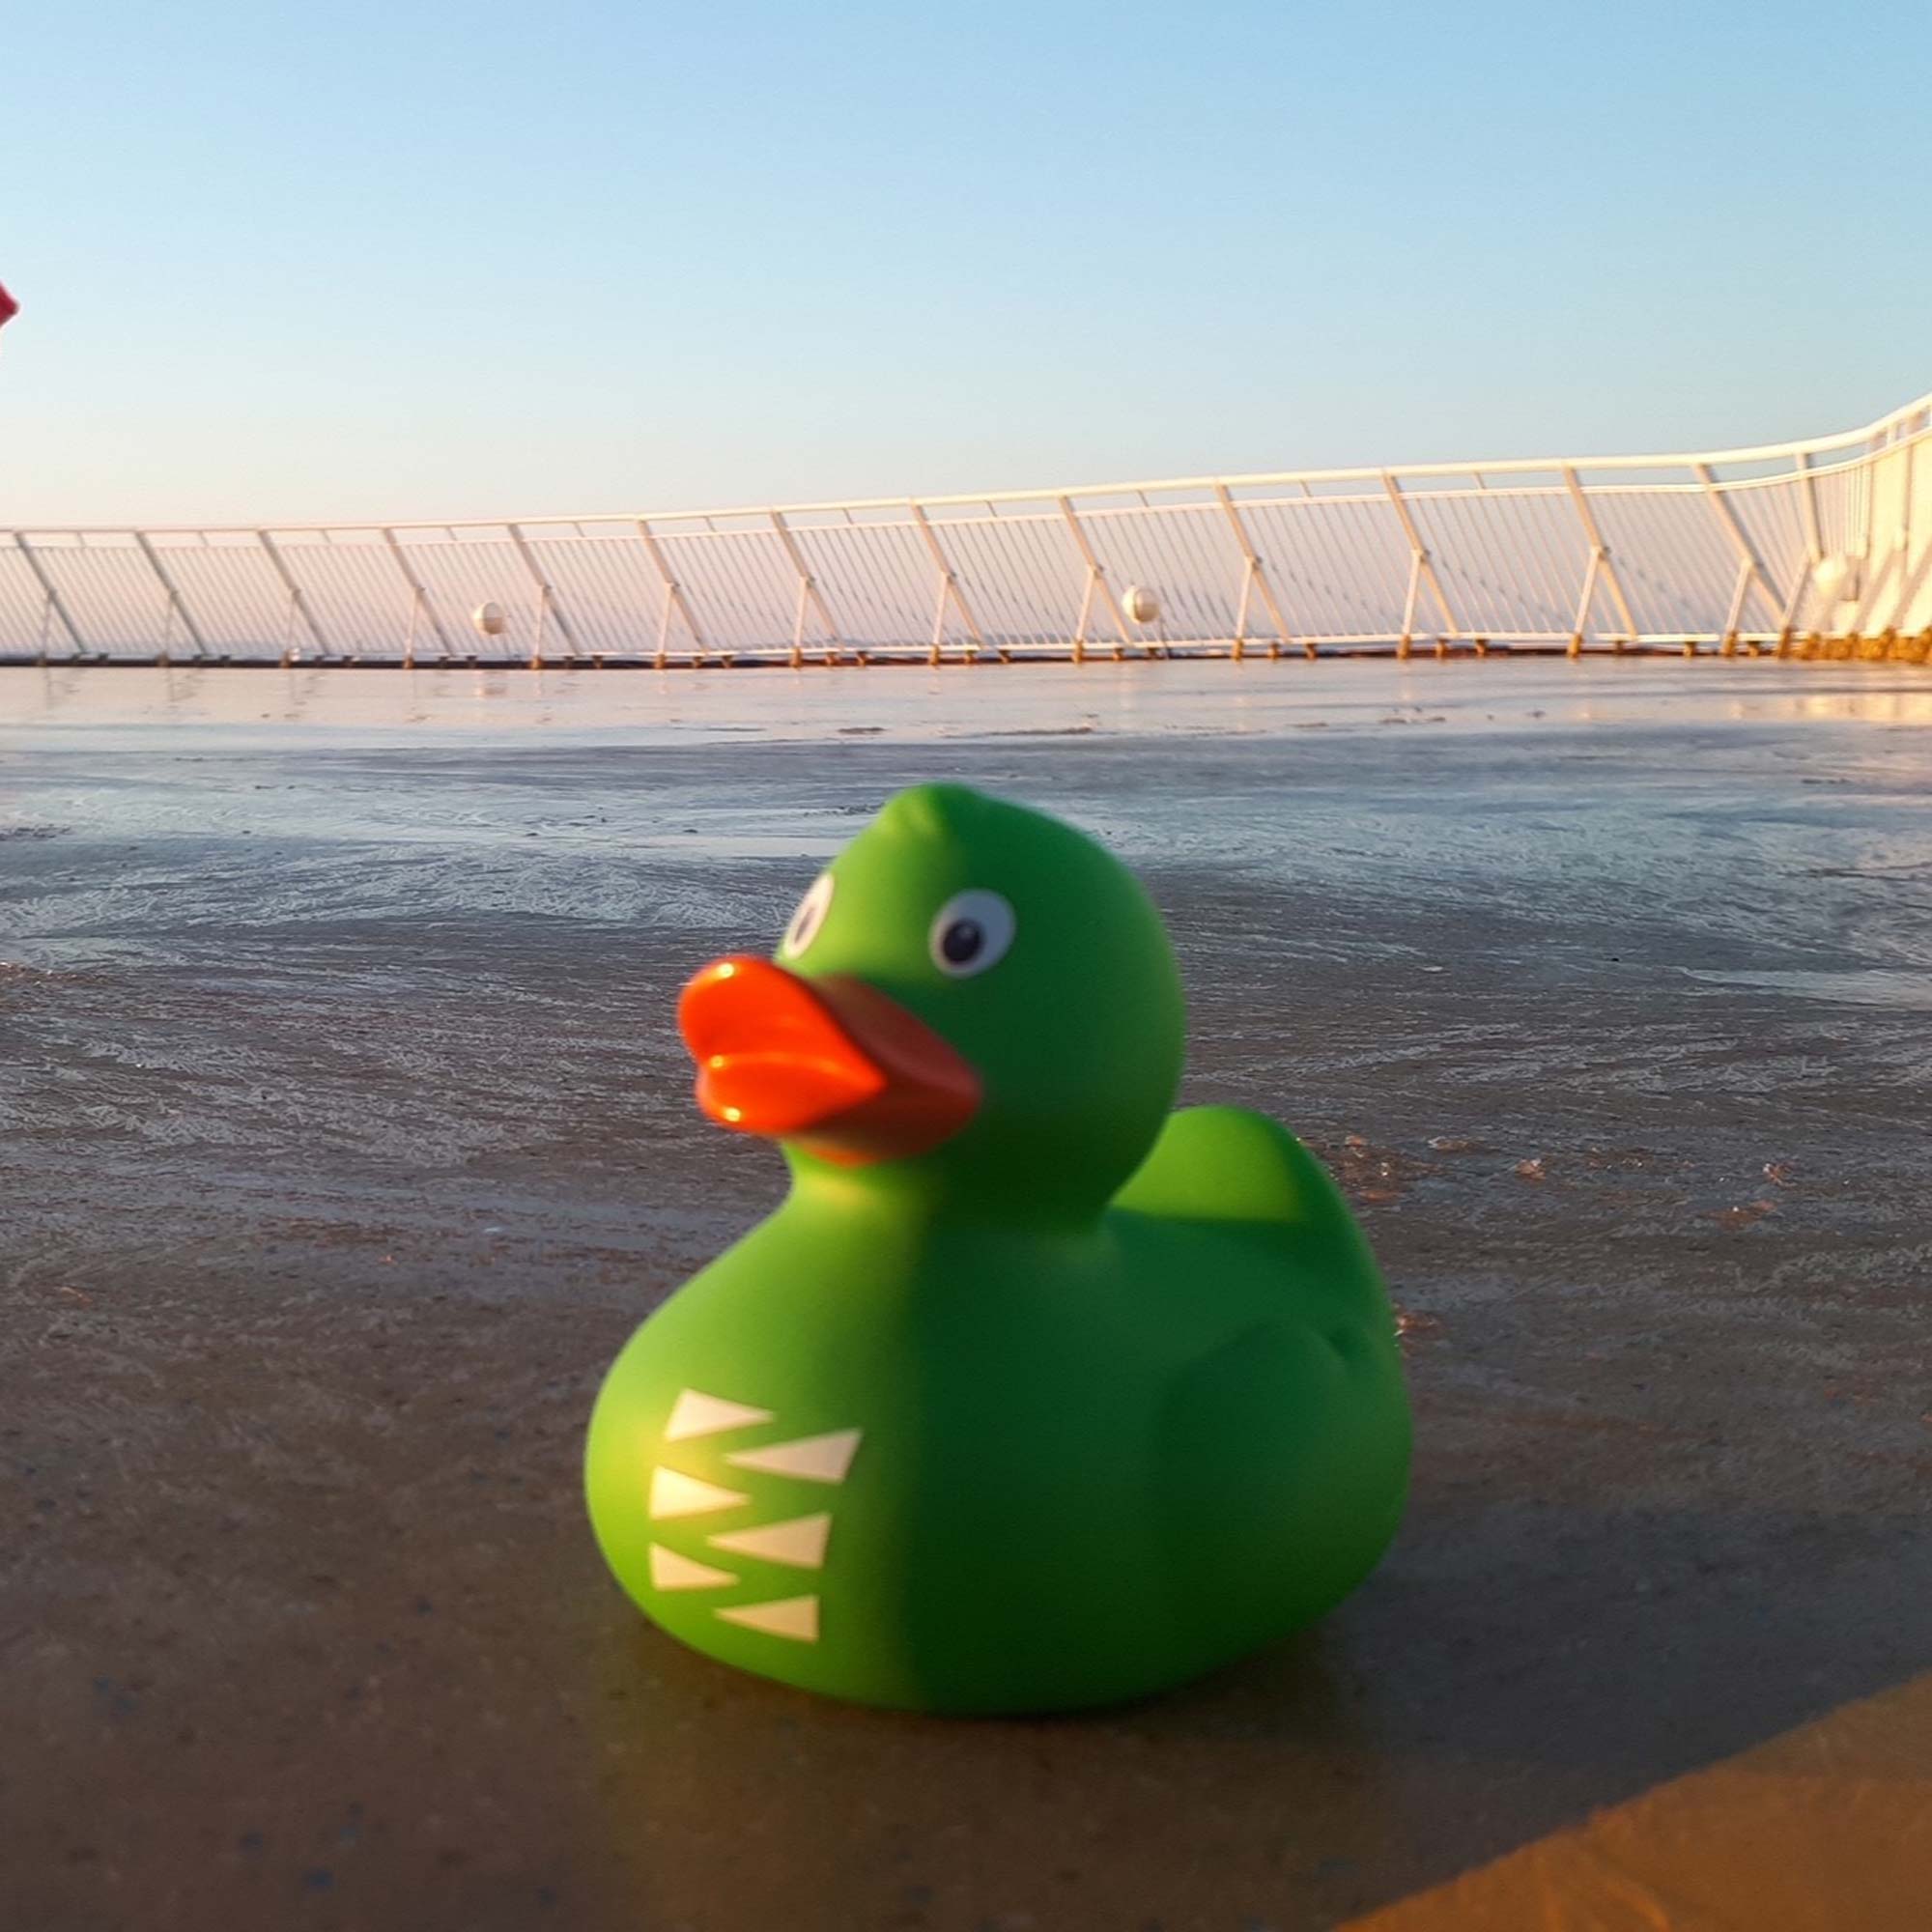 Our green squeaky duck Cablo is our mascot and sits on the beach at sunset.